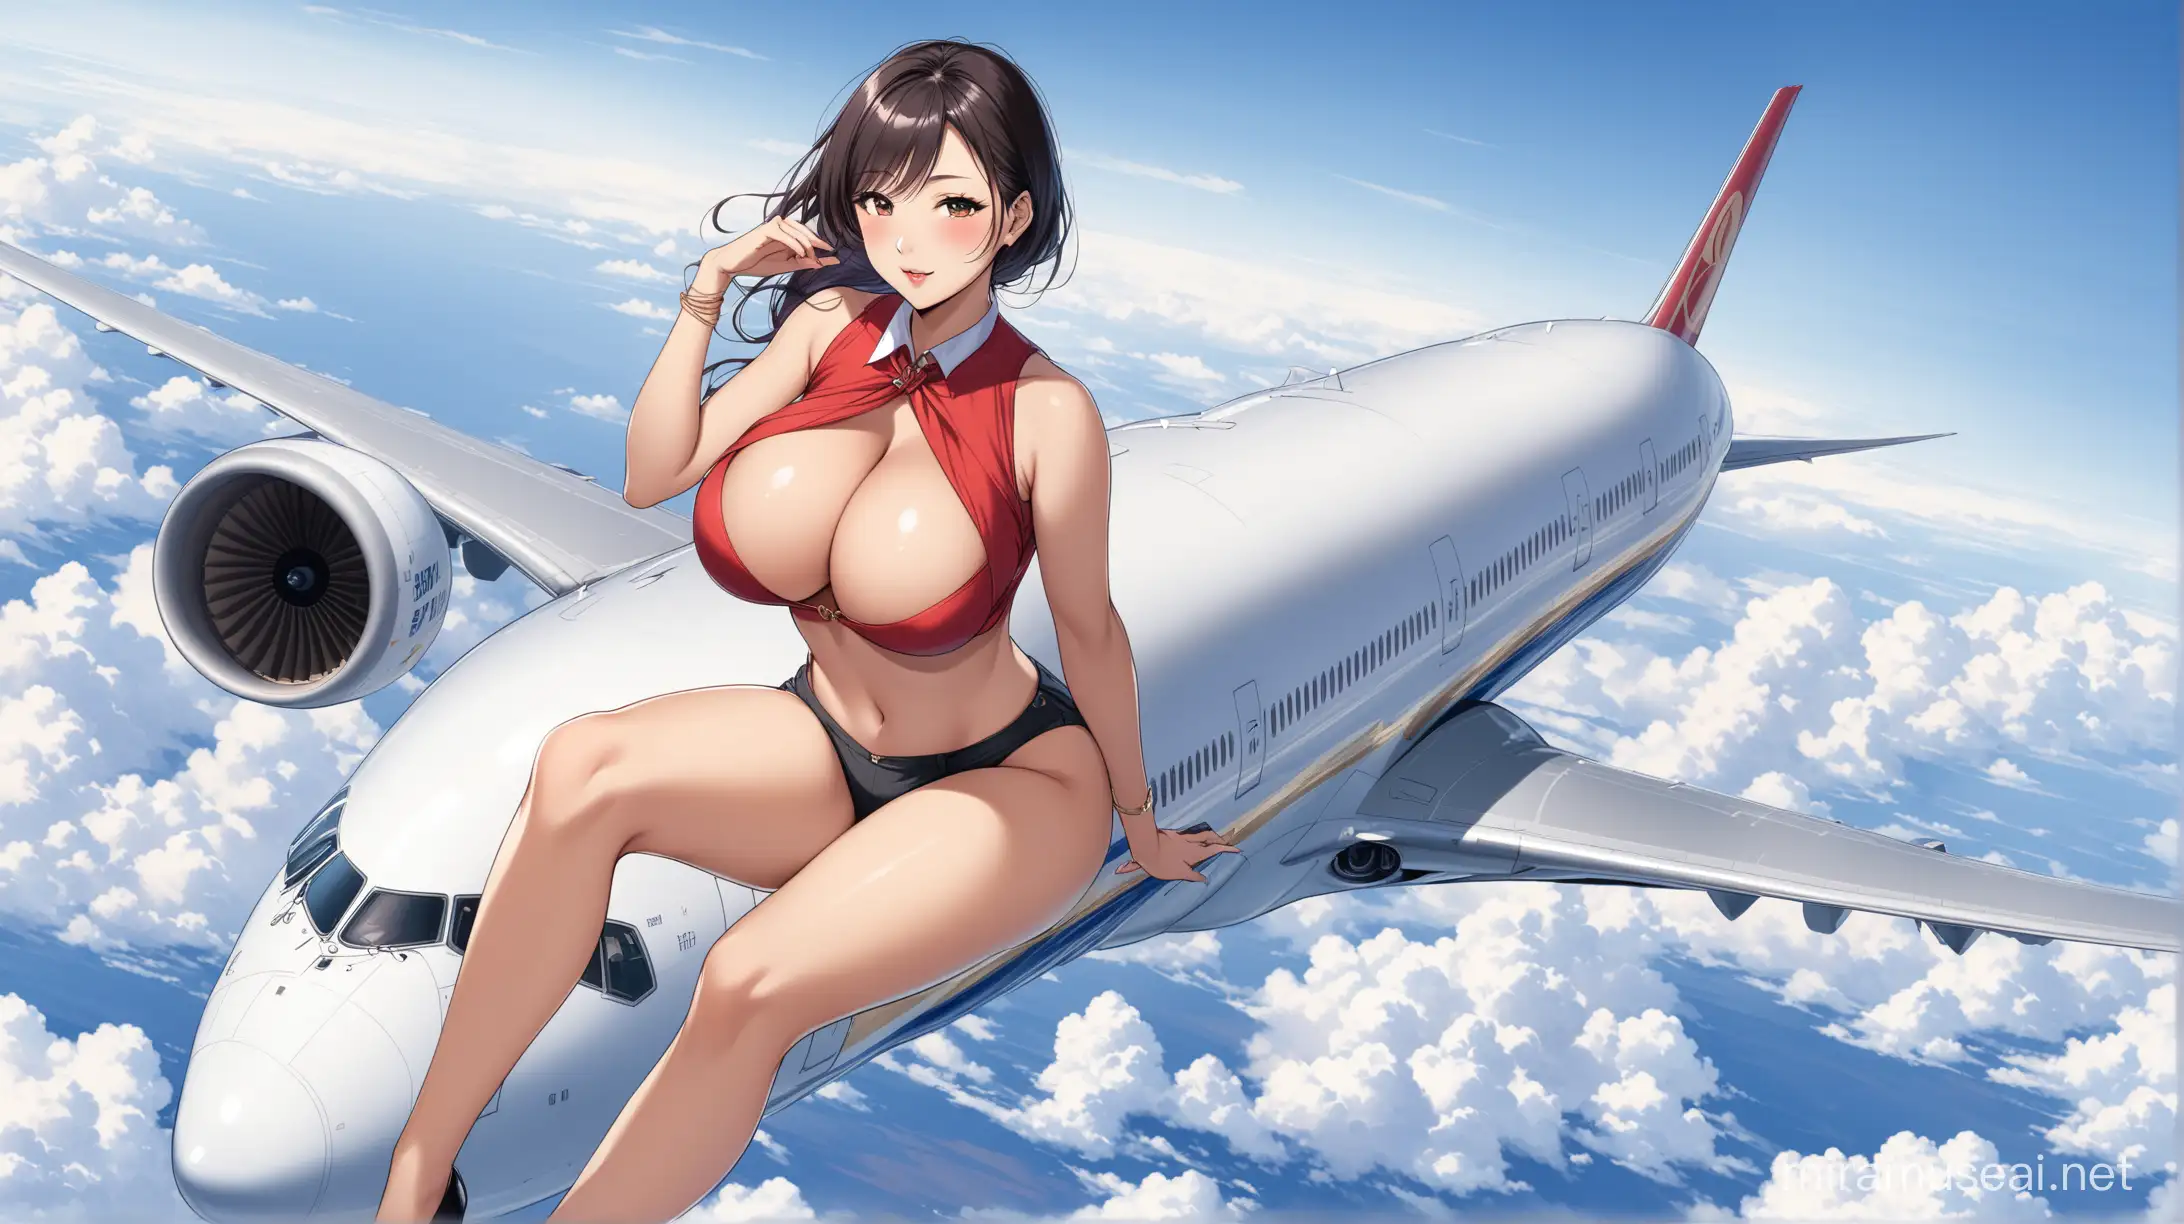 Asian Woman with Large Breasts Sitting Atop Airborne Boeing 7779